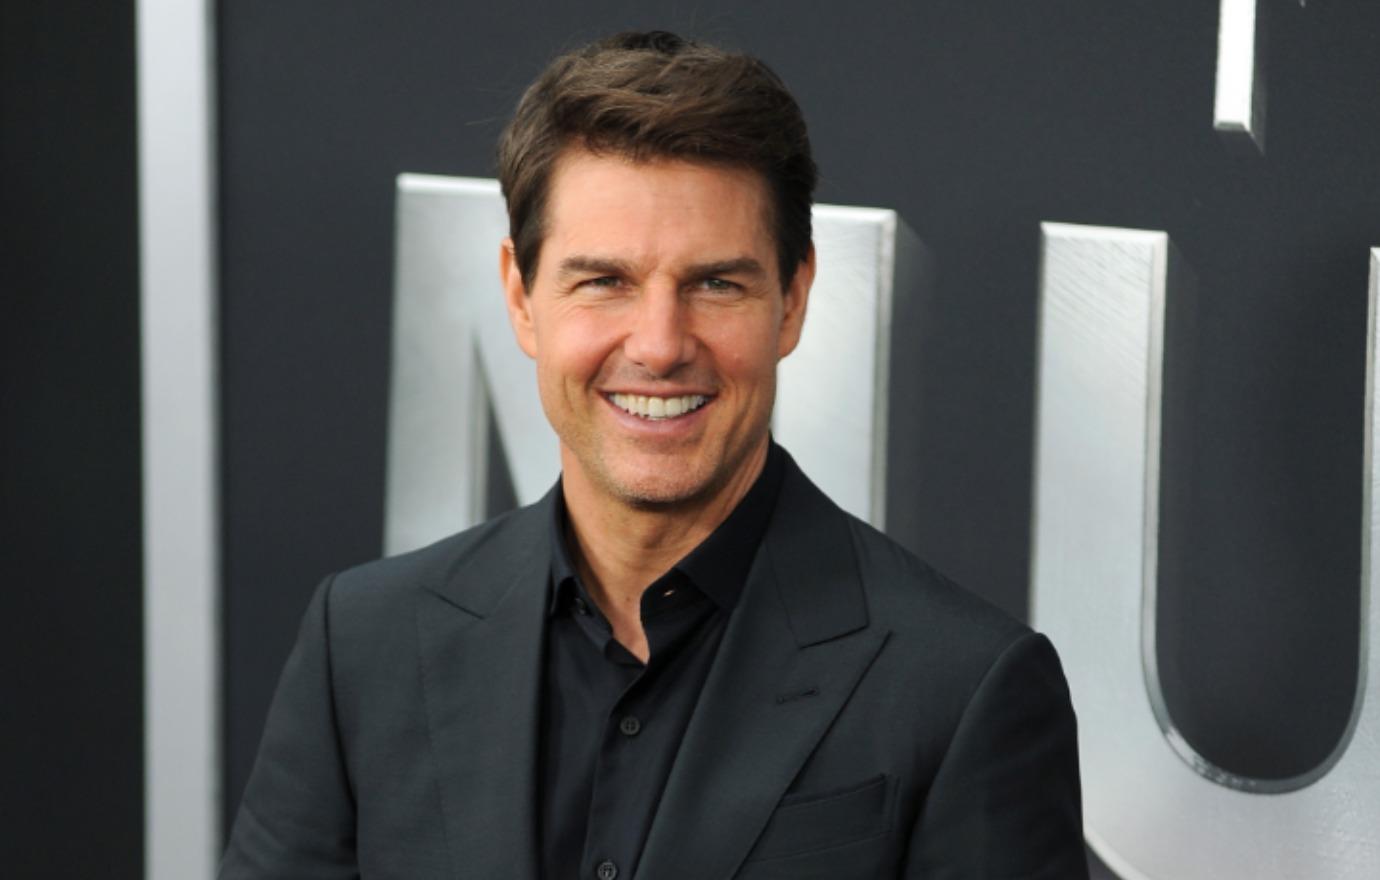 Tom Cruise Sparks Romance With Actress After Hayley Atwell Split